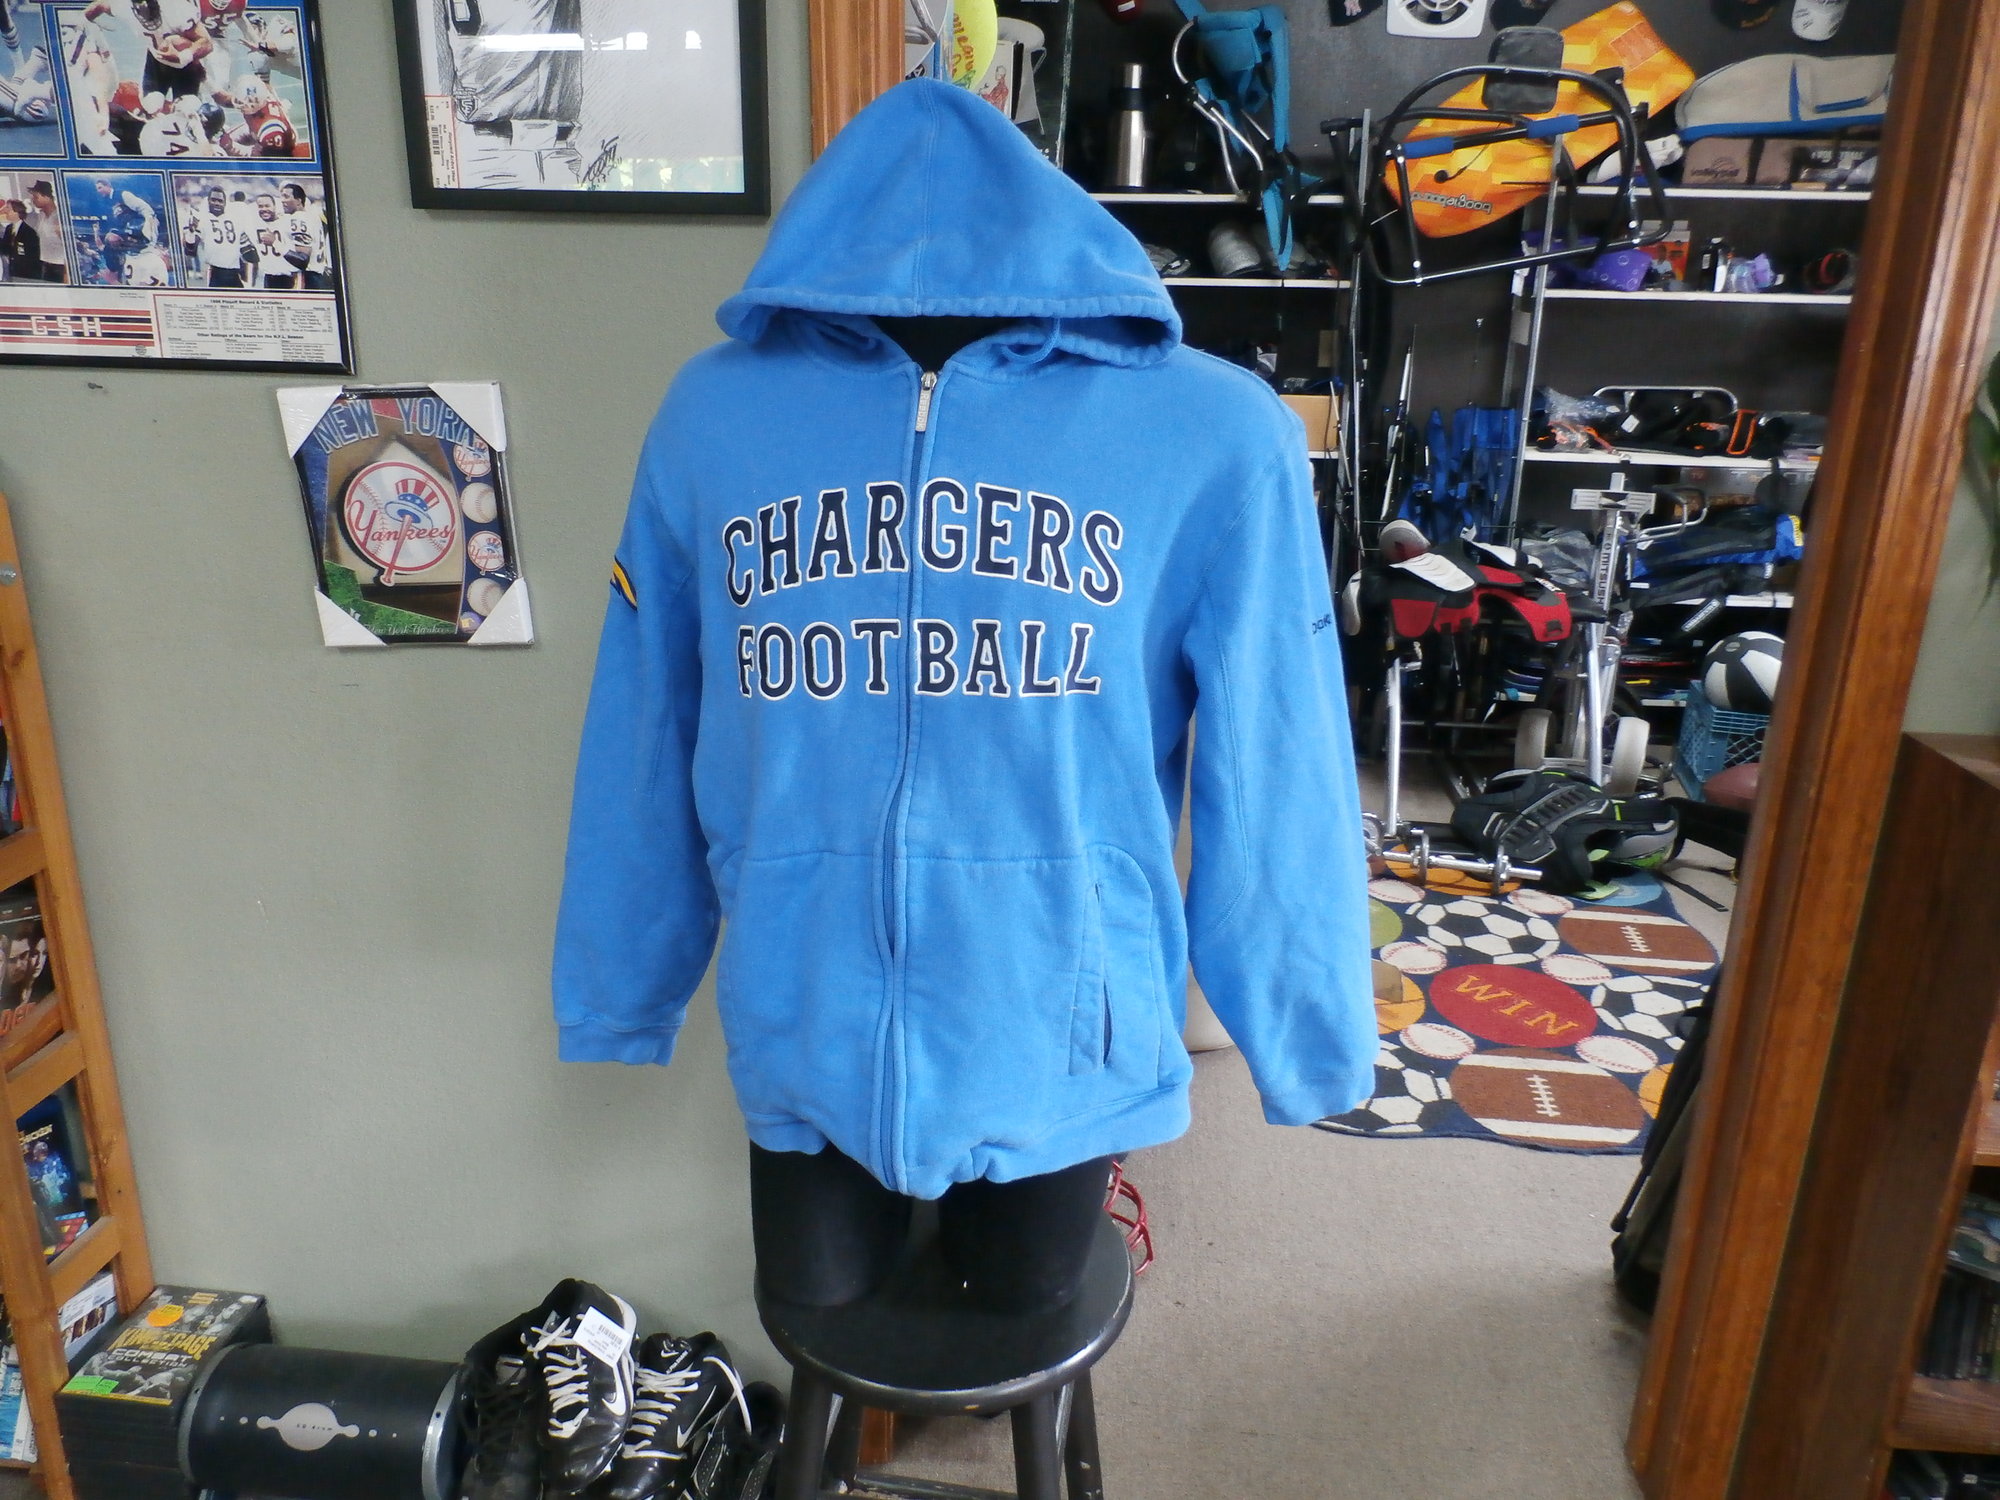 San Diego Chargers Hoodie Blue size Small #22283
Our Clothes Rating: 3- Good Condition
Brand: Reebok
size: Men's Small (Chest: 22\" Length: 25\")
color: Powder Blue
Style: zip up hoodie; embroidered logos
Condition: 3- Good- slightly worn and faded; light pilling and fuzz; noticeable light pilling across the lower front; sleeve ends are worn from use; material is slightly stretched out at the bottom;
Shipping: FREE
Item #: 22283